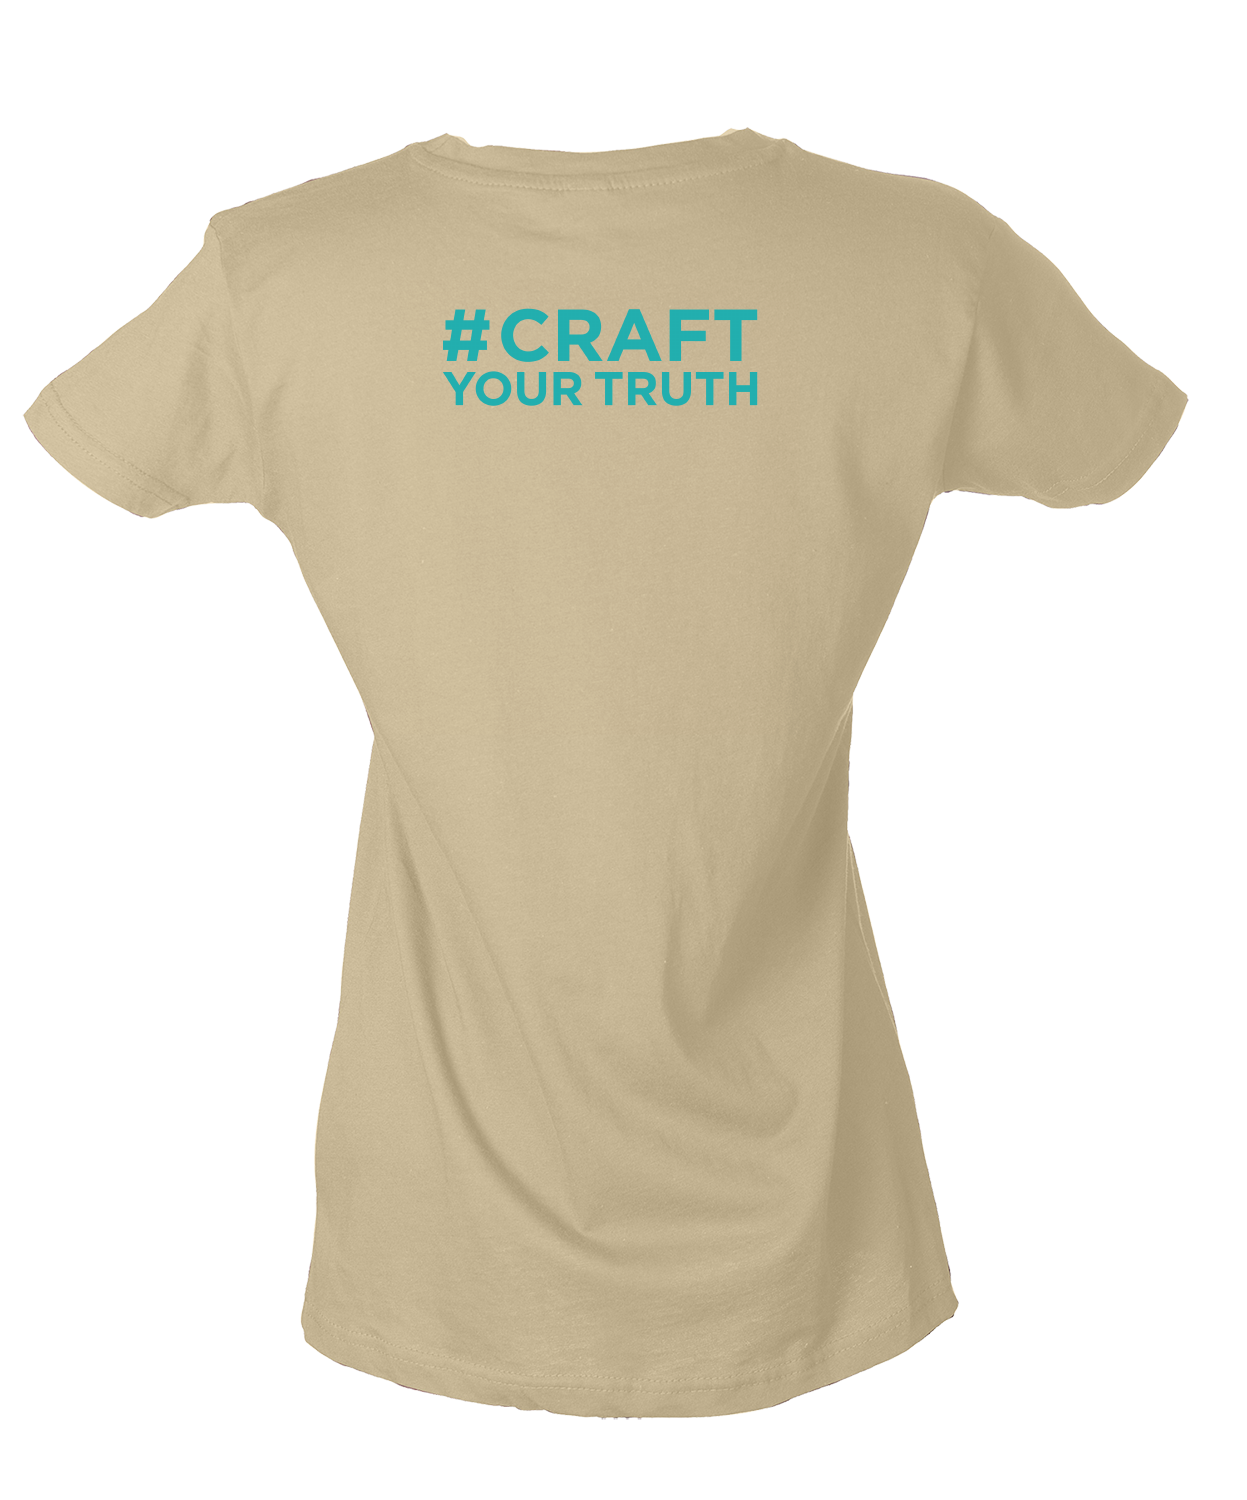 Girly Natural Mary Kate Wiles - Craftversations T-shirt